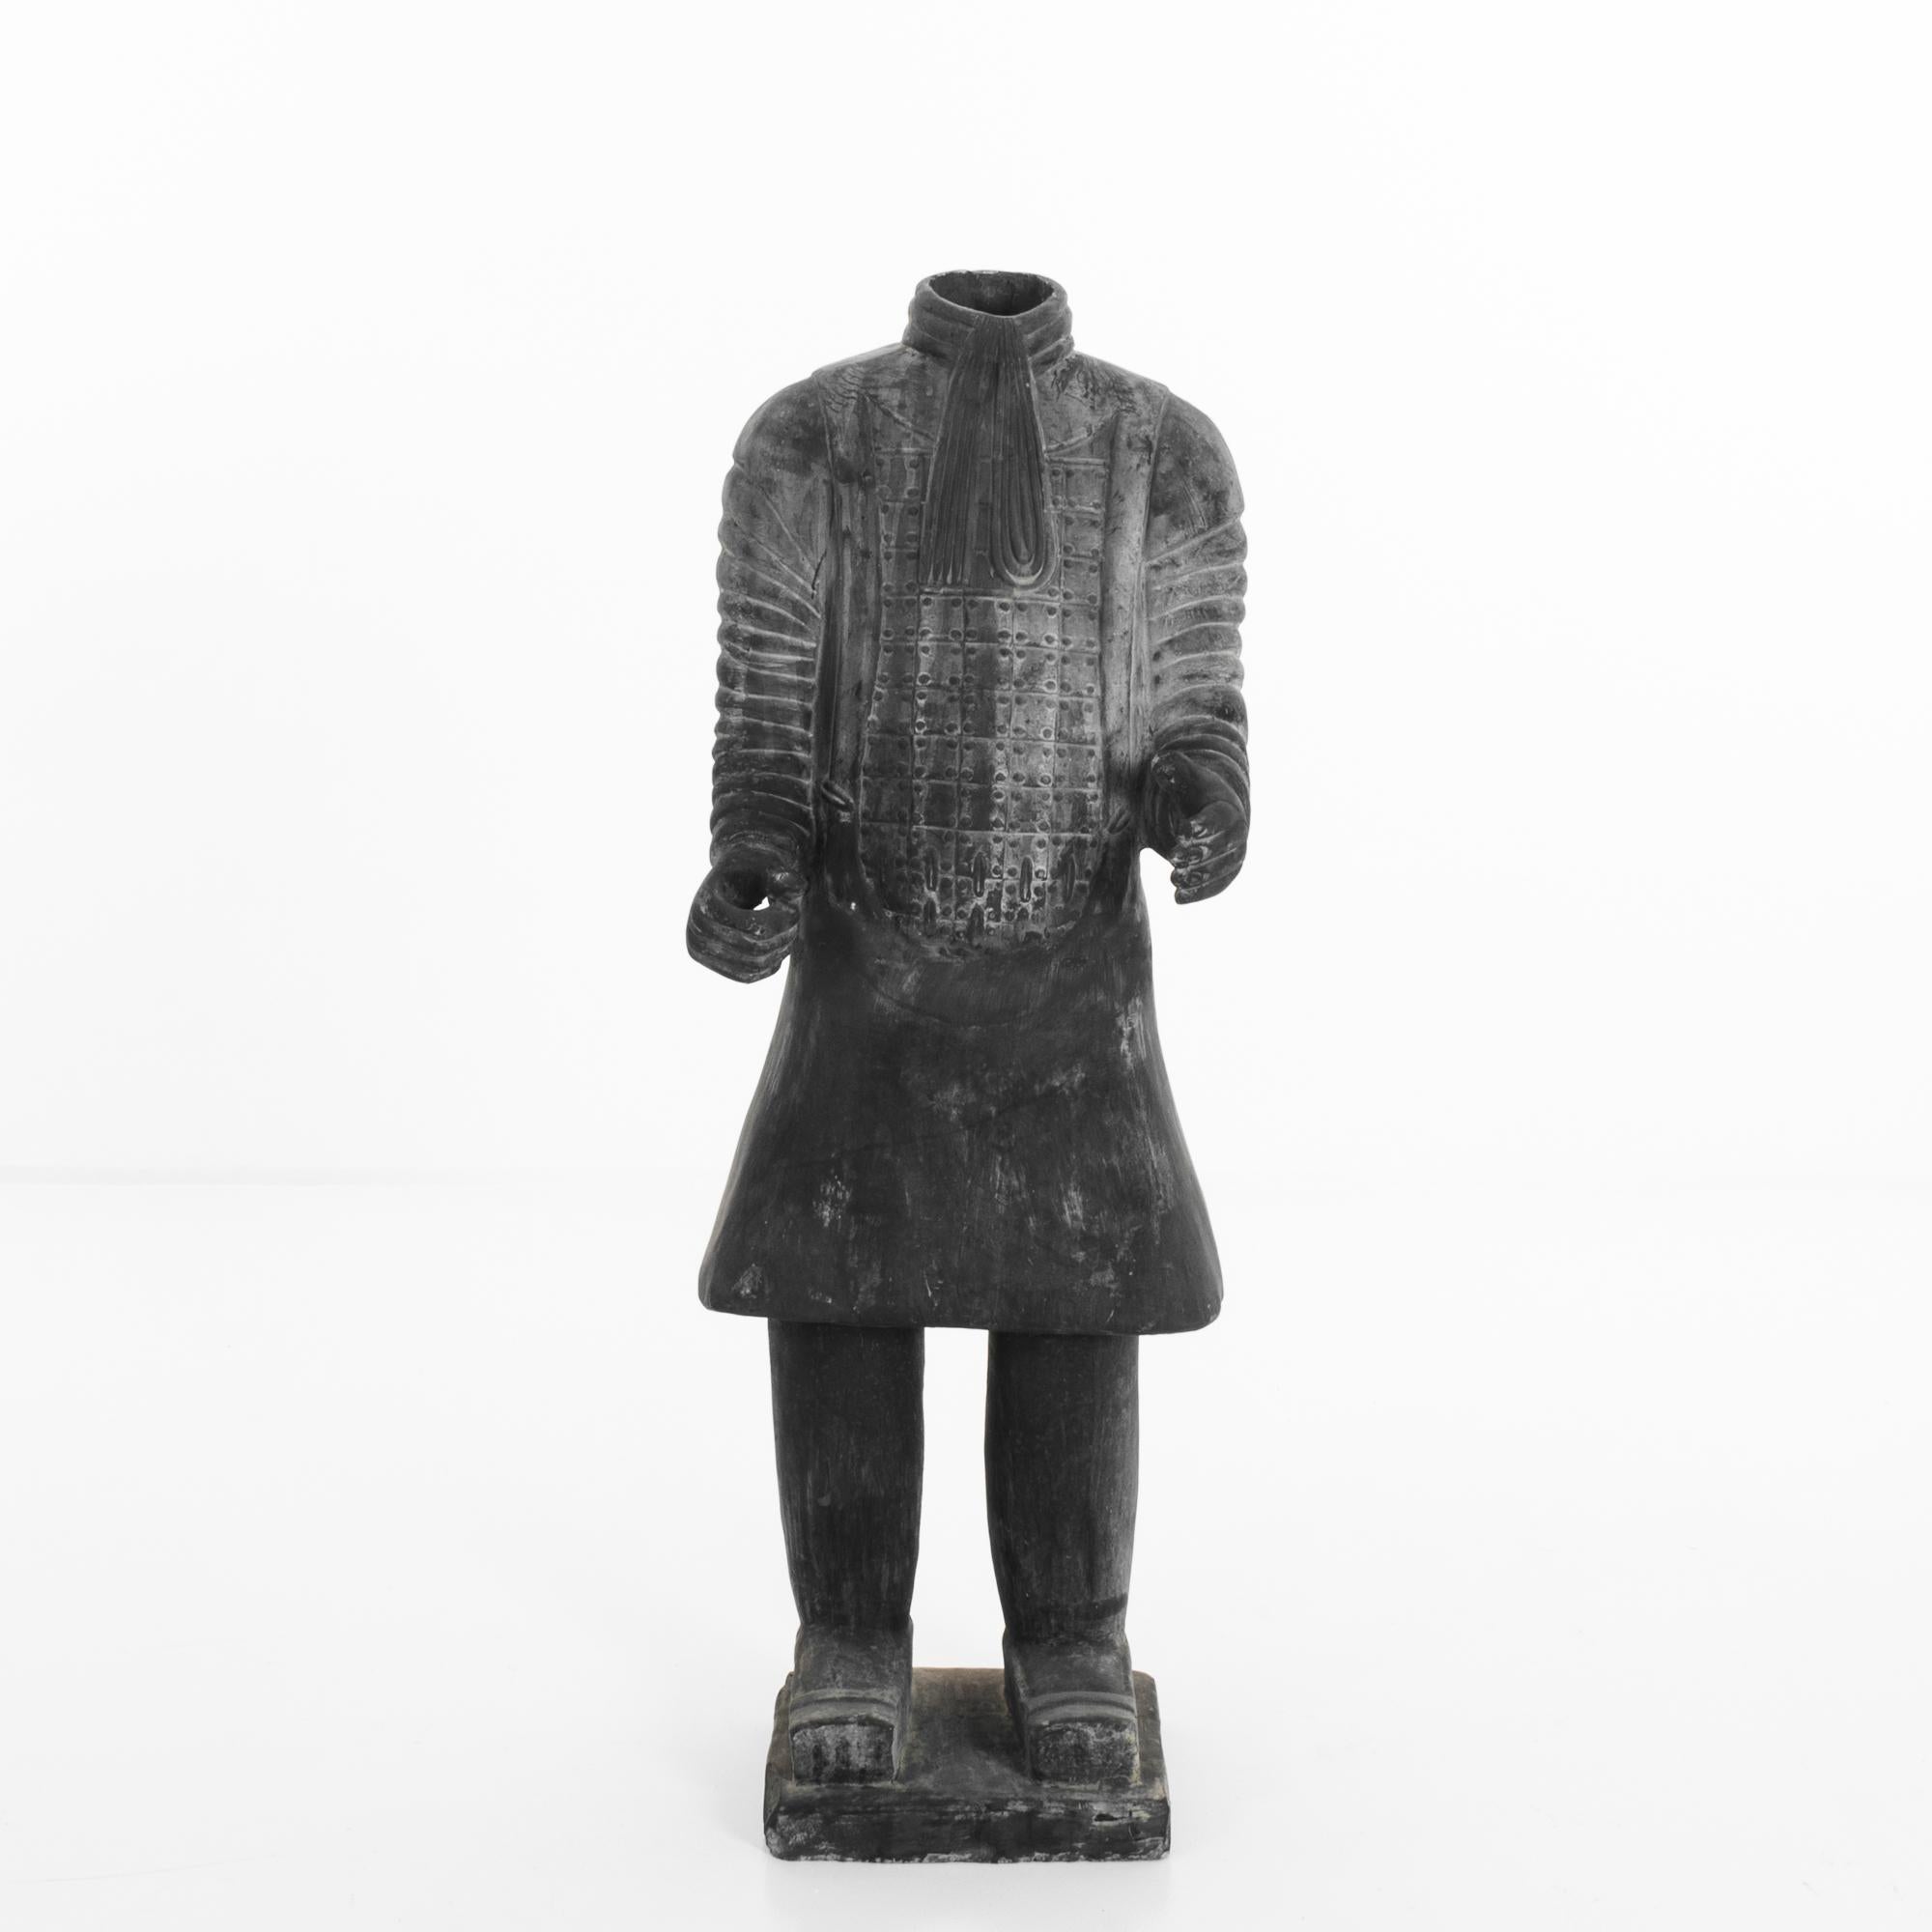 A ceramic sculpture of a soldier produced in China. Around five feet tall, this warrior stands a diligent, silent guard. Similar in style to the Terracotta army of Emperor Qinshihuang, this ceramic soldier stands booted, armored, and scarved on a